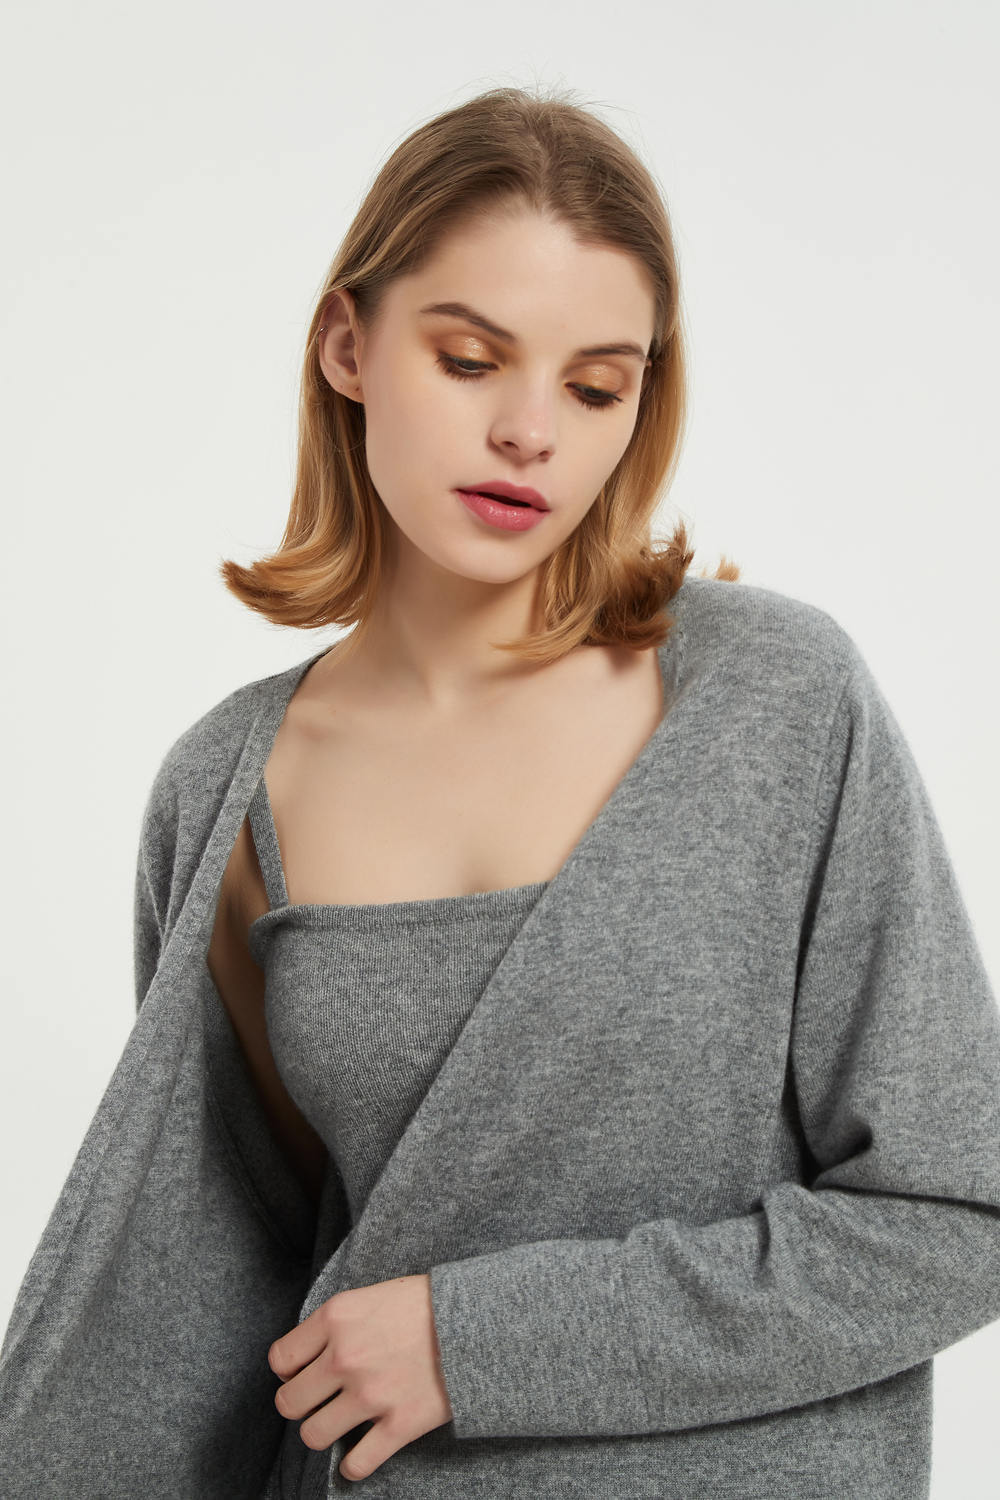 How to wash the cashmere loungewear?